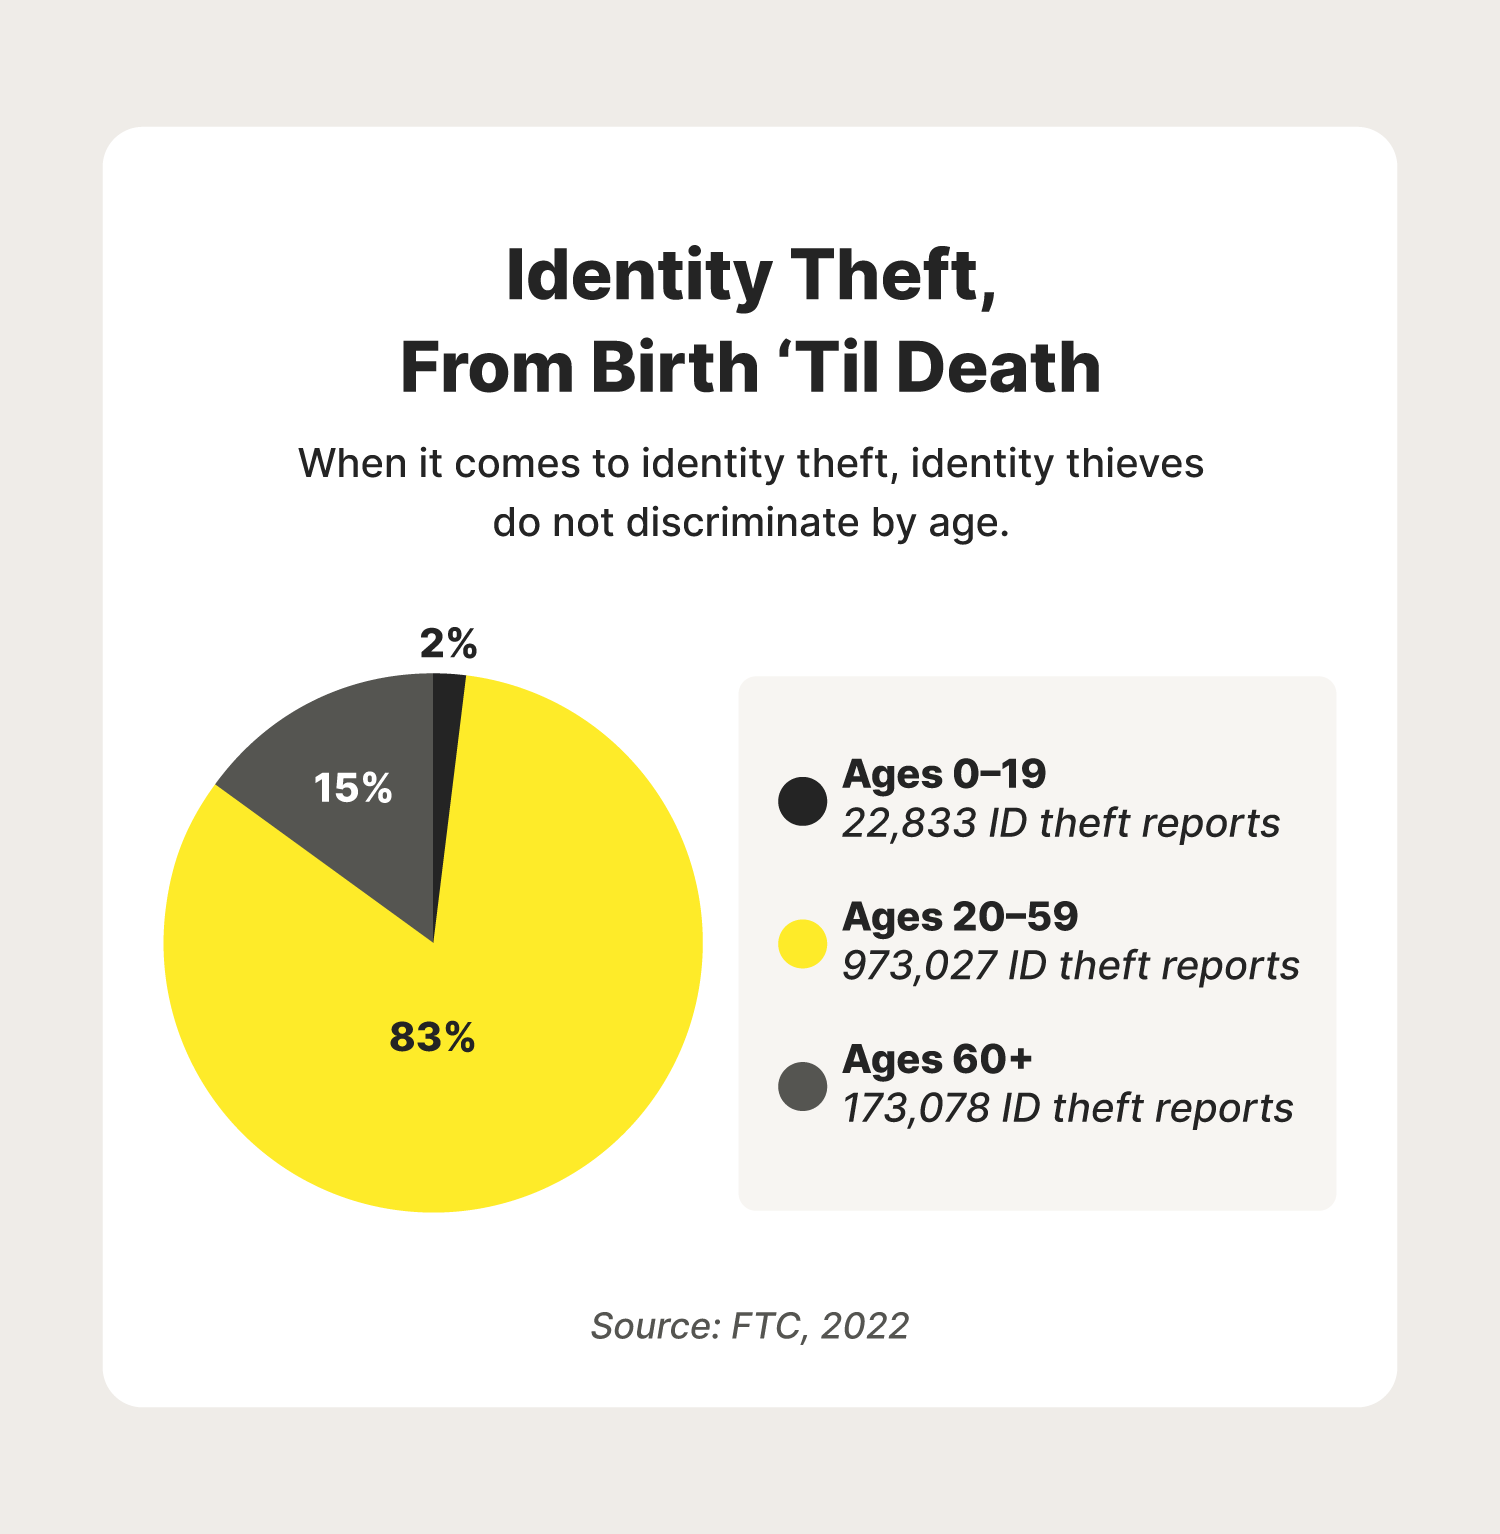 A graphic illustrates how different types of identity theft can affect those of all ages, breaking down the number of identity theft reports per age group.